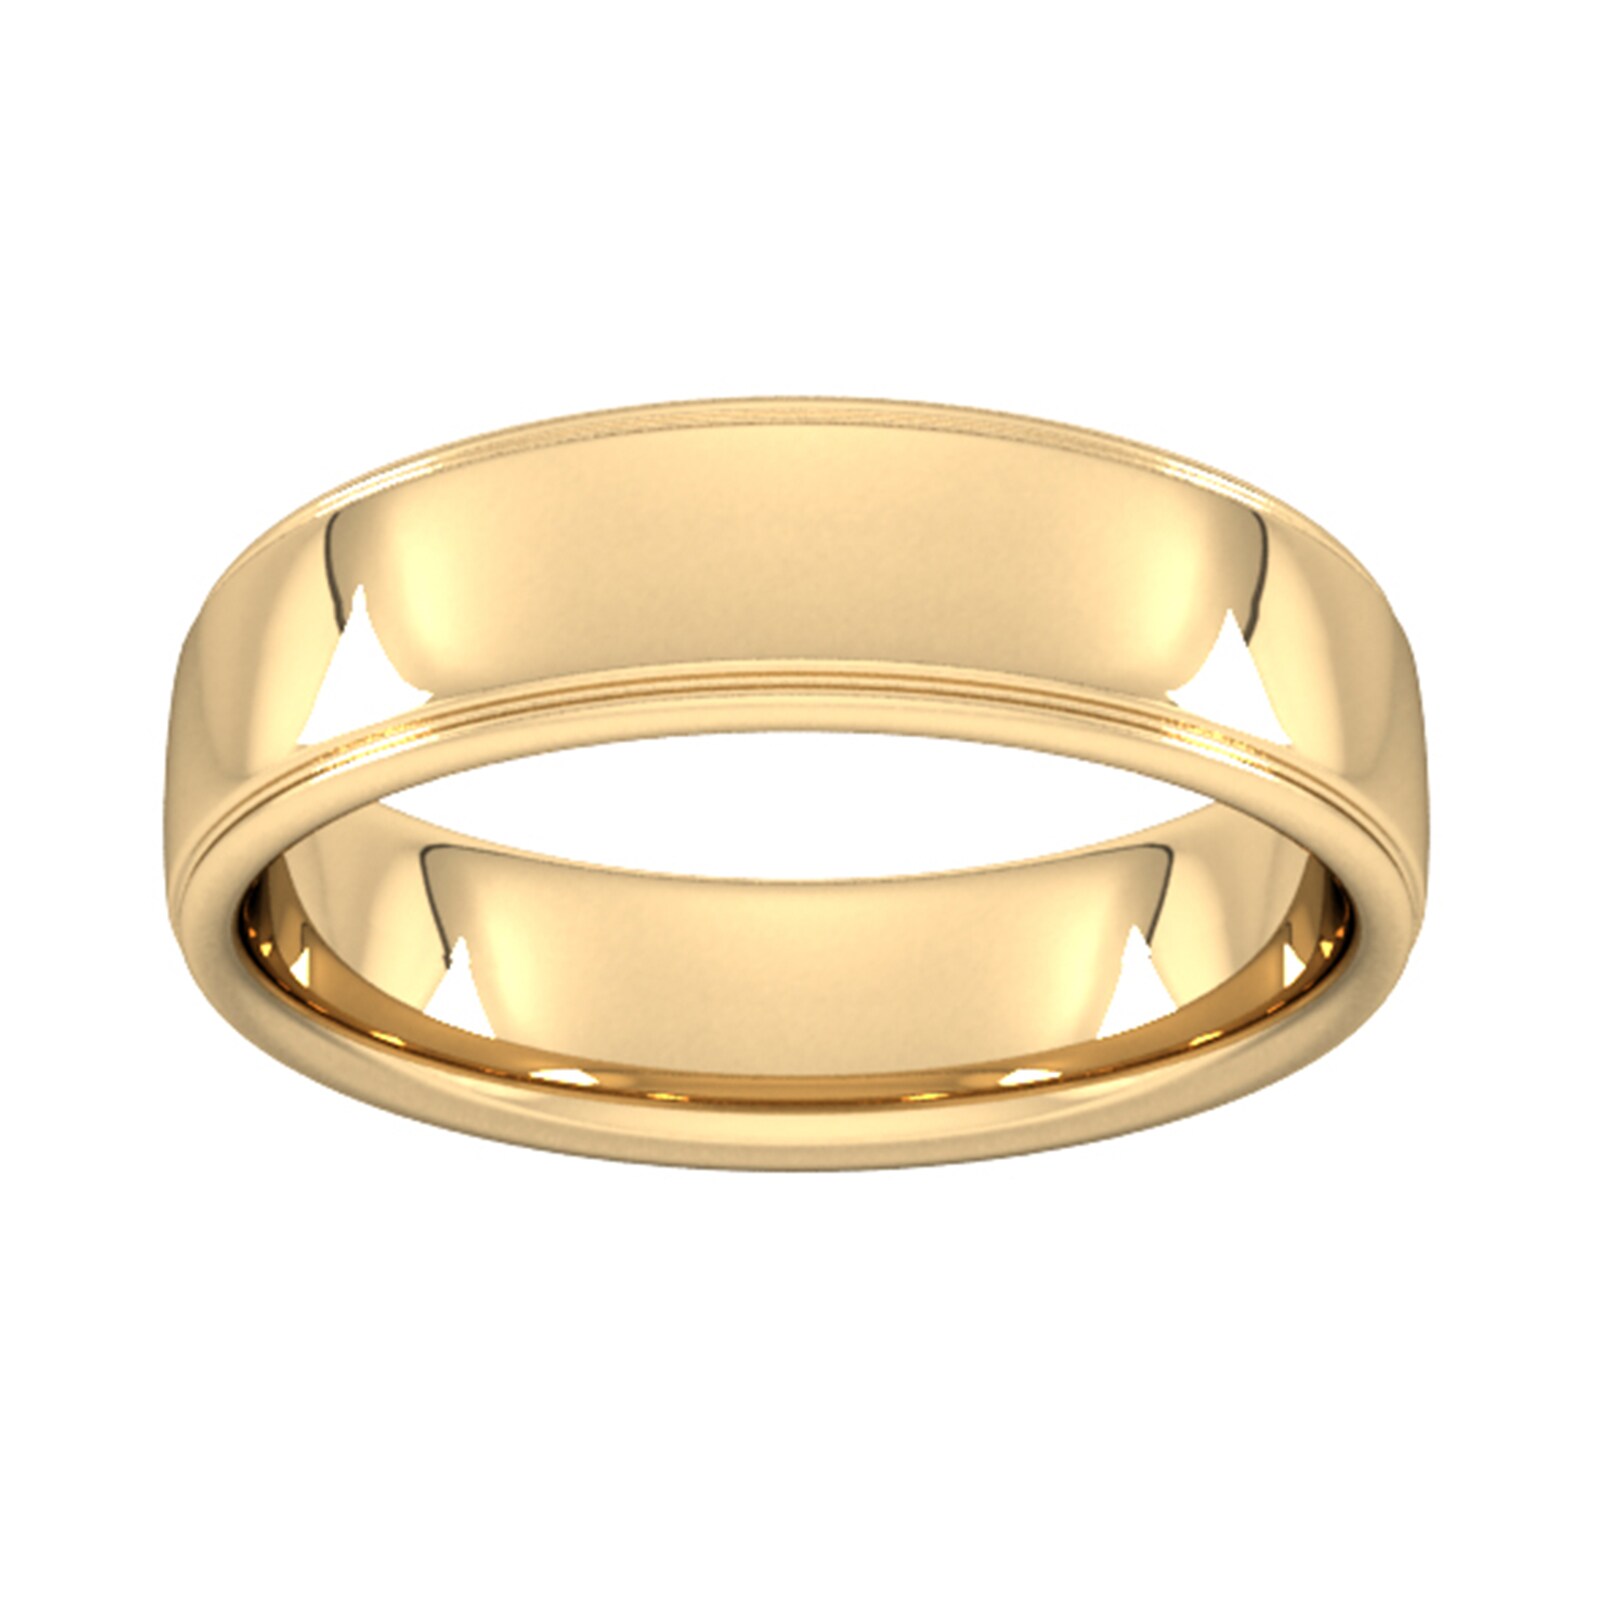 6mm Slight Court Extra Heavy Polished Finish With Grooves Wedding Ring In 18 Carat Yellow Gold - Ring Size J